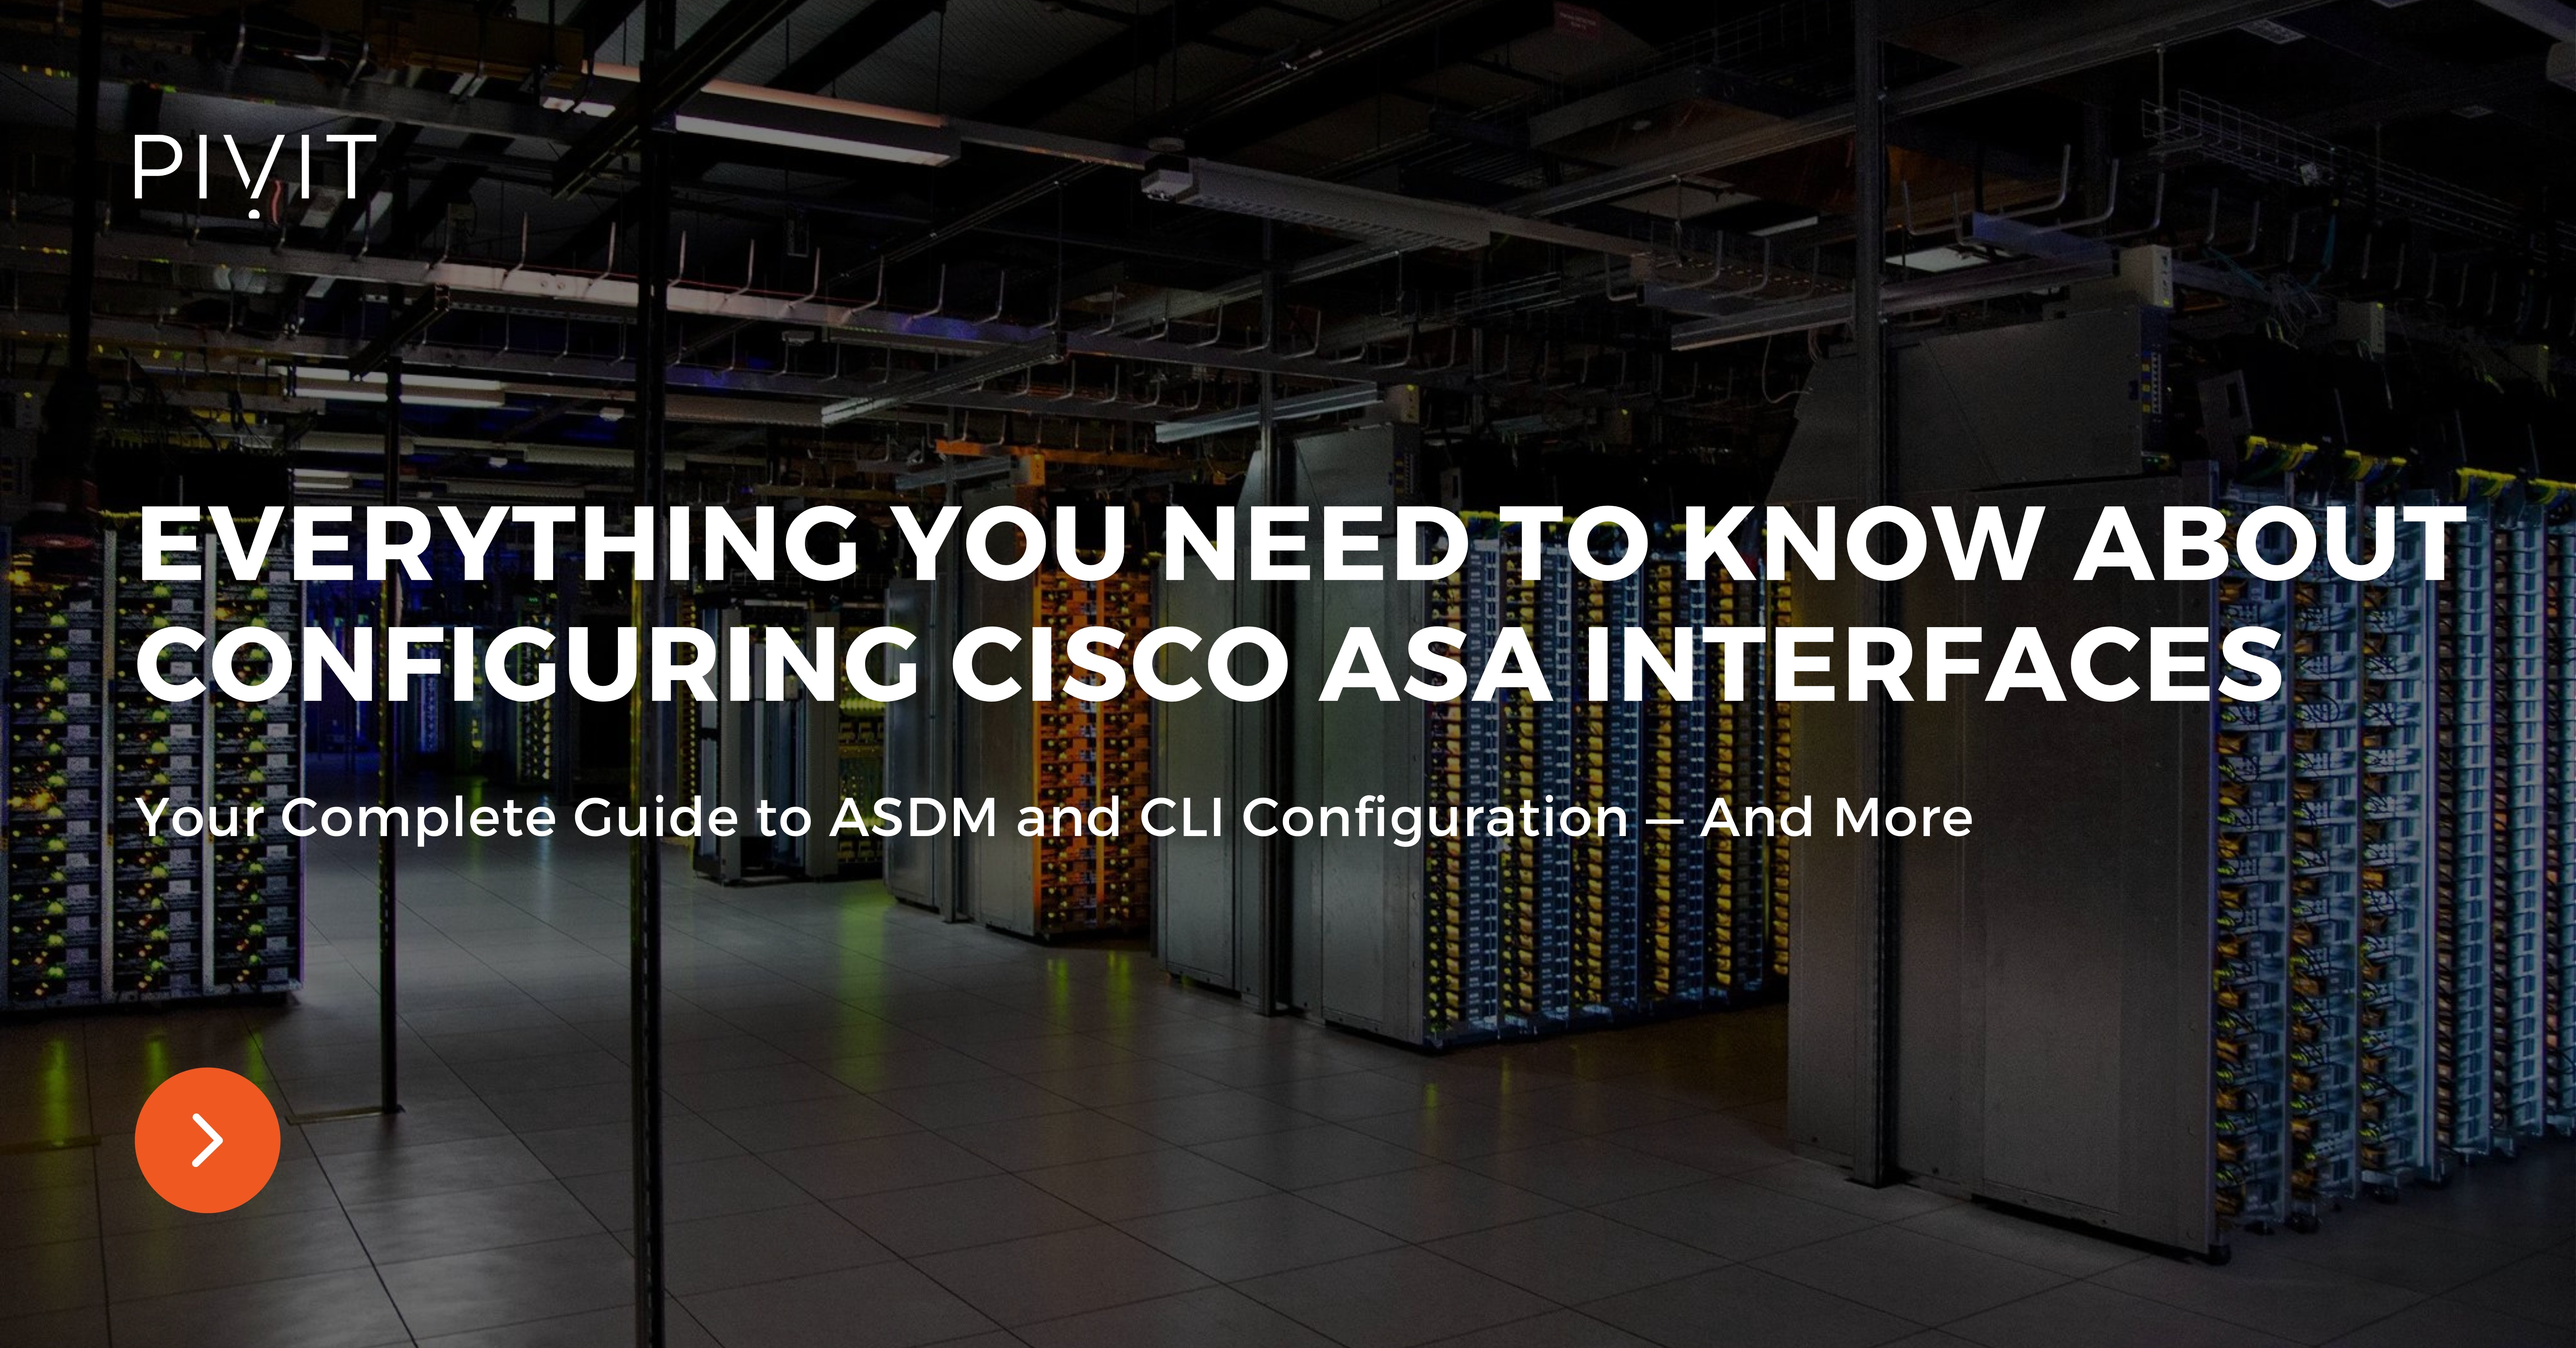 Everything You Need to Know About Configuring Cisco ASA Interfaces